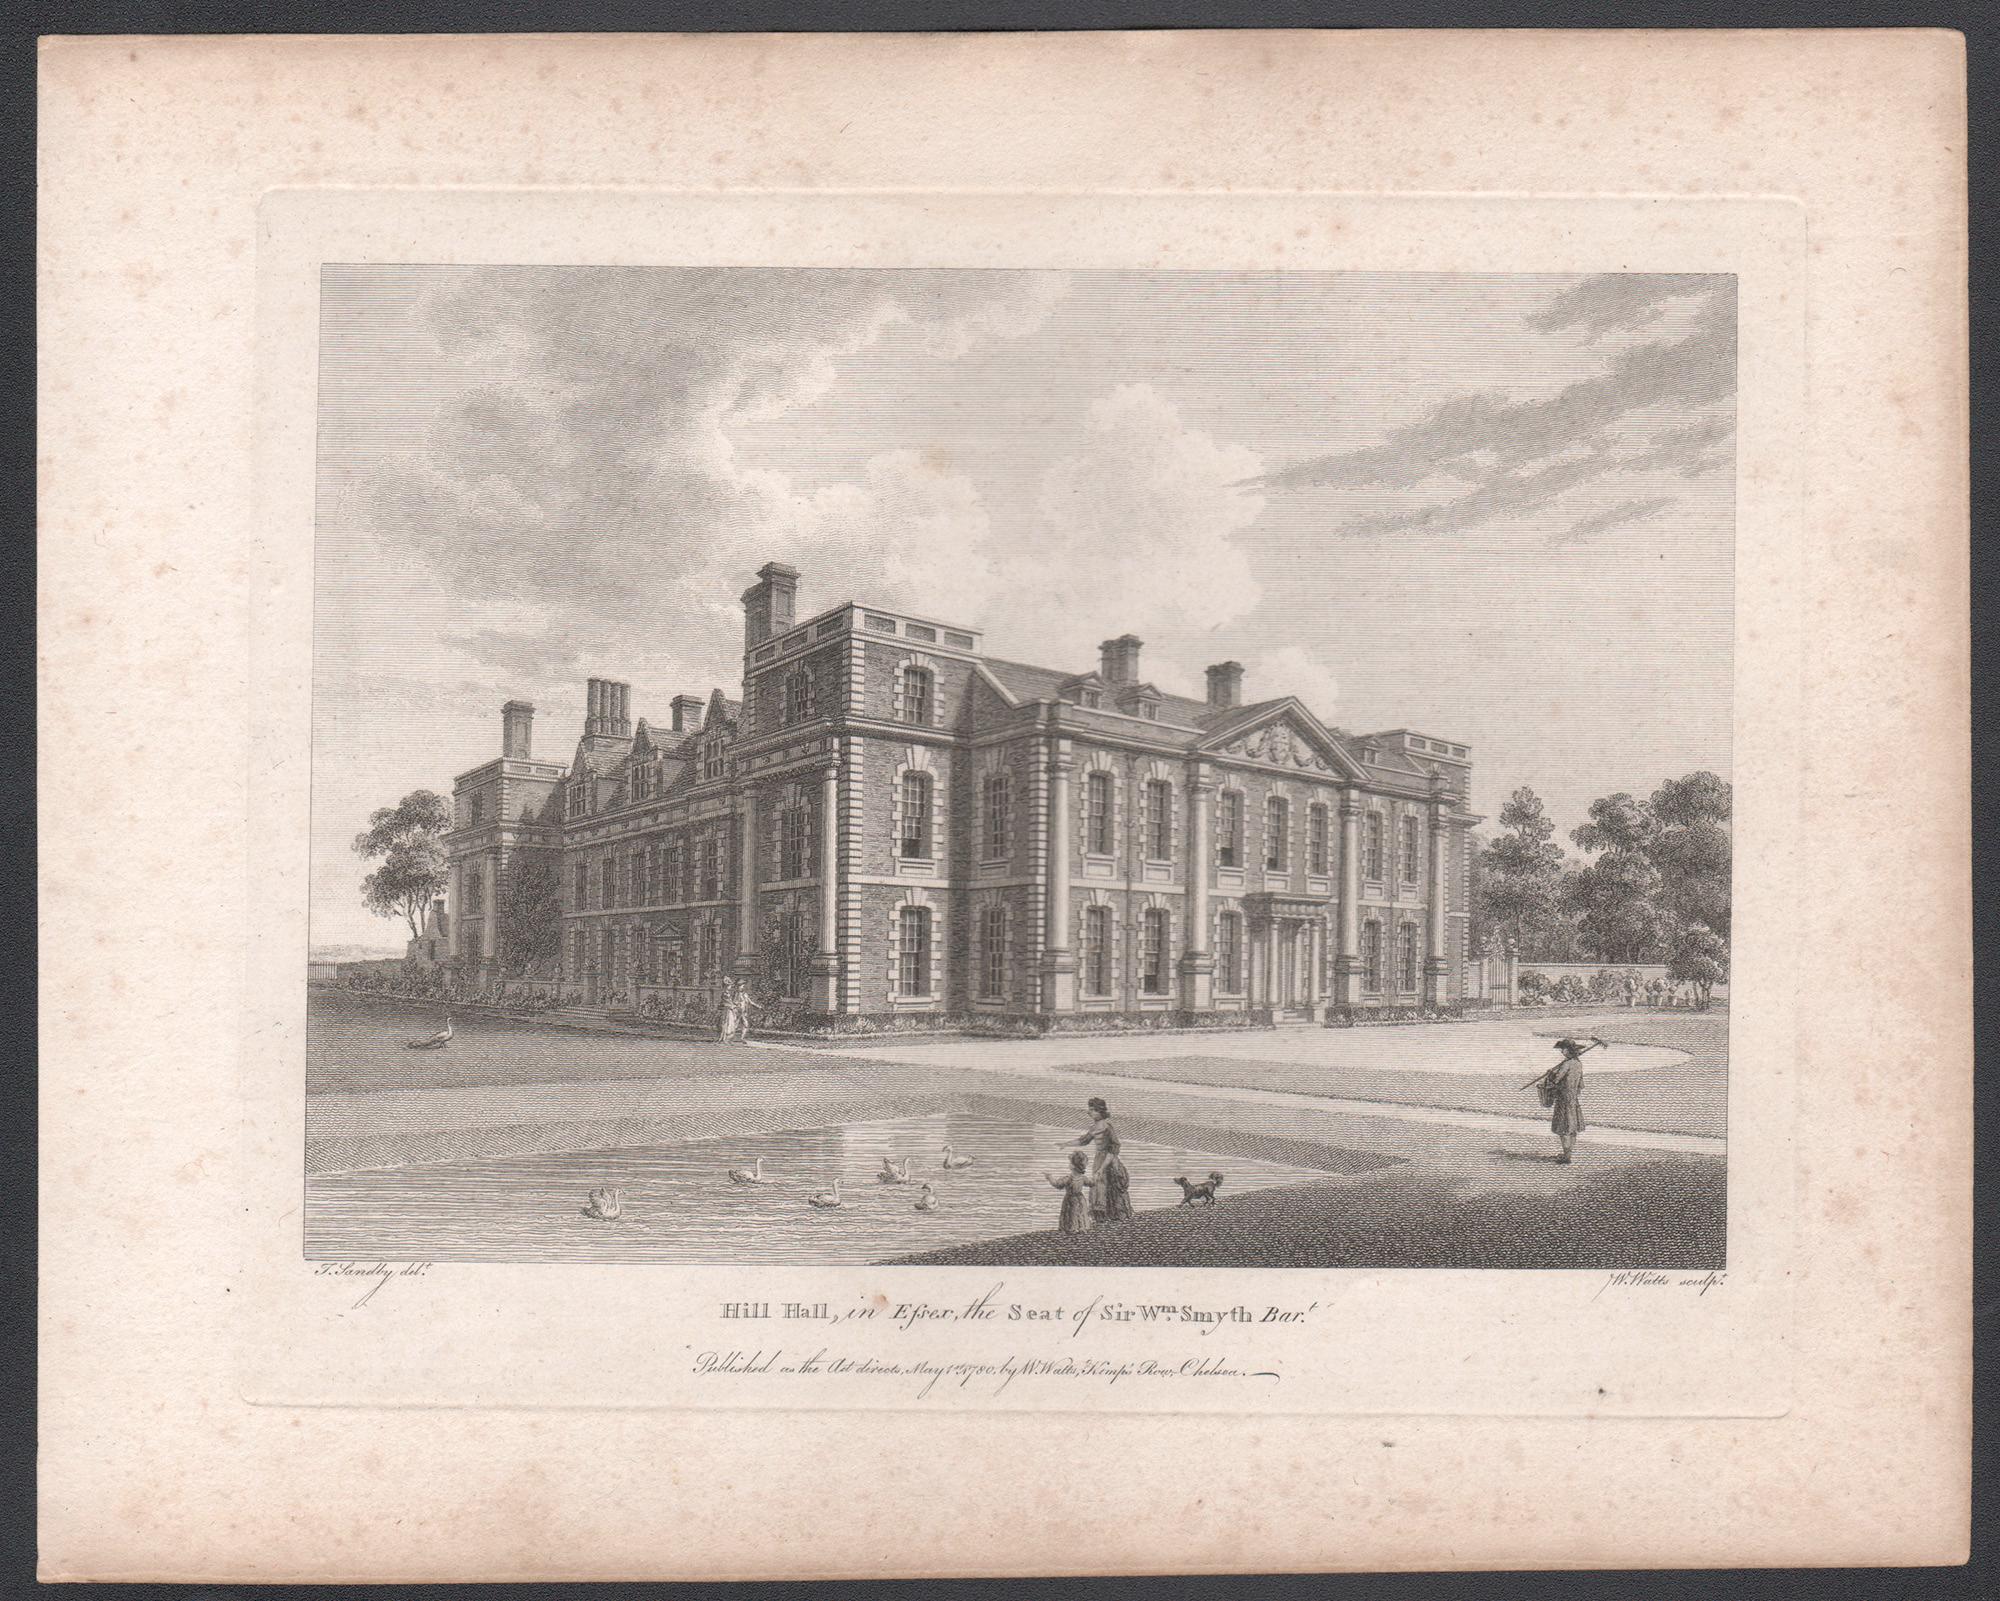 Hill Hall in Essex, 18th century English country house engraving, 1780 - Print by William Watts